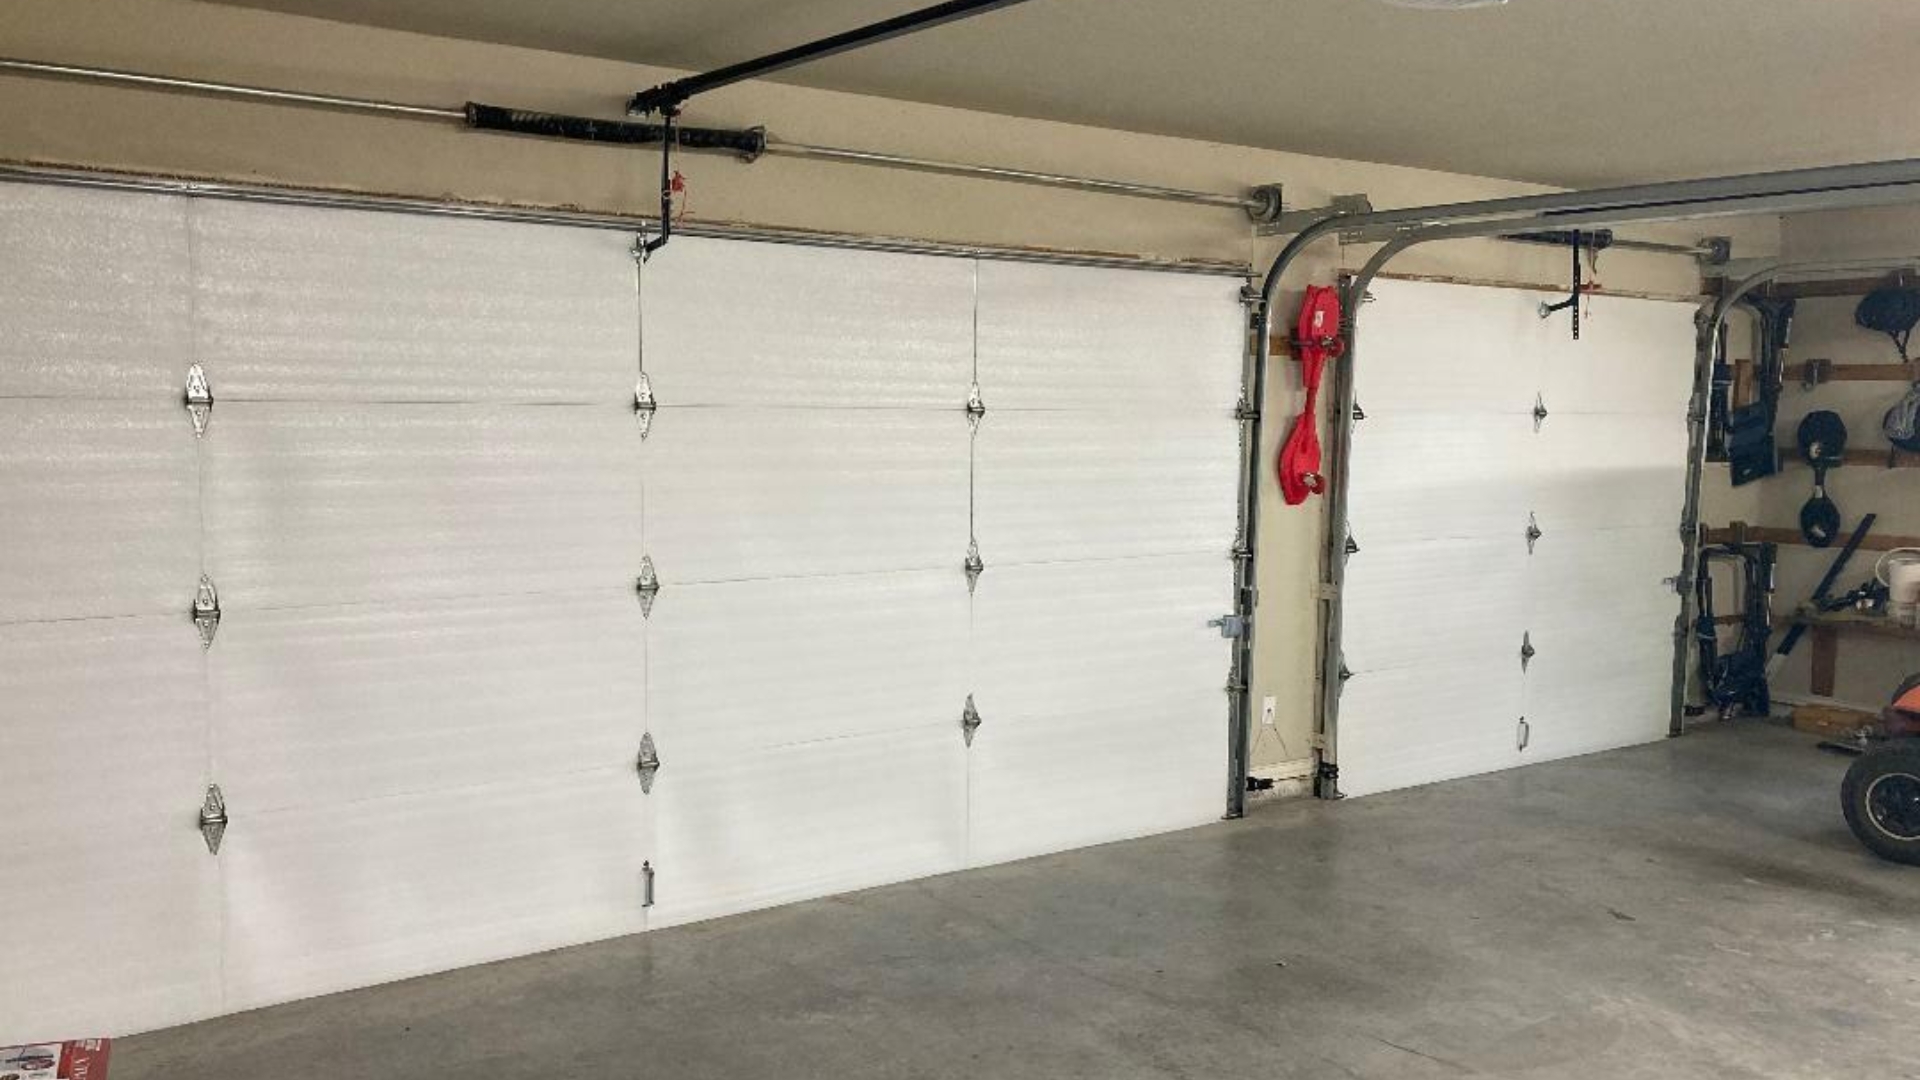 An image of the back part of insulated garage doors